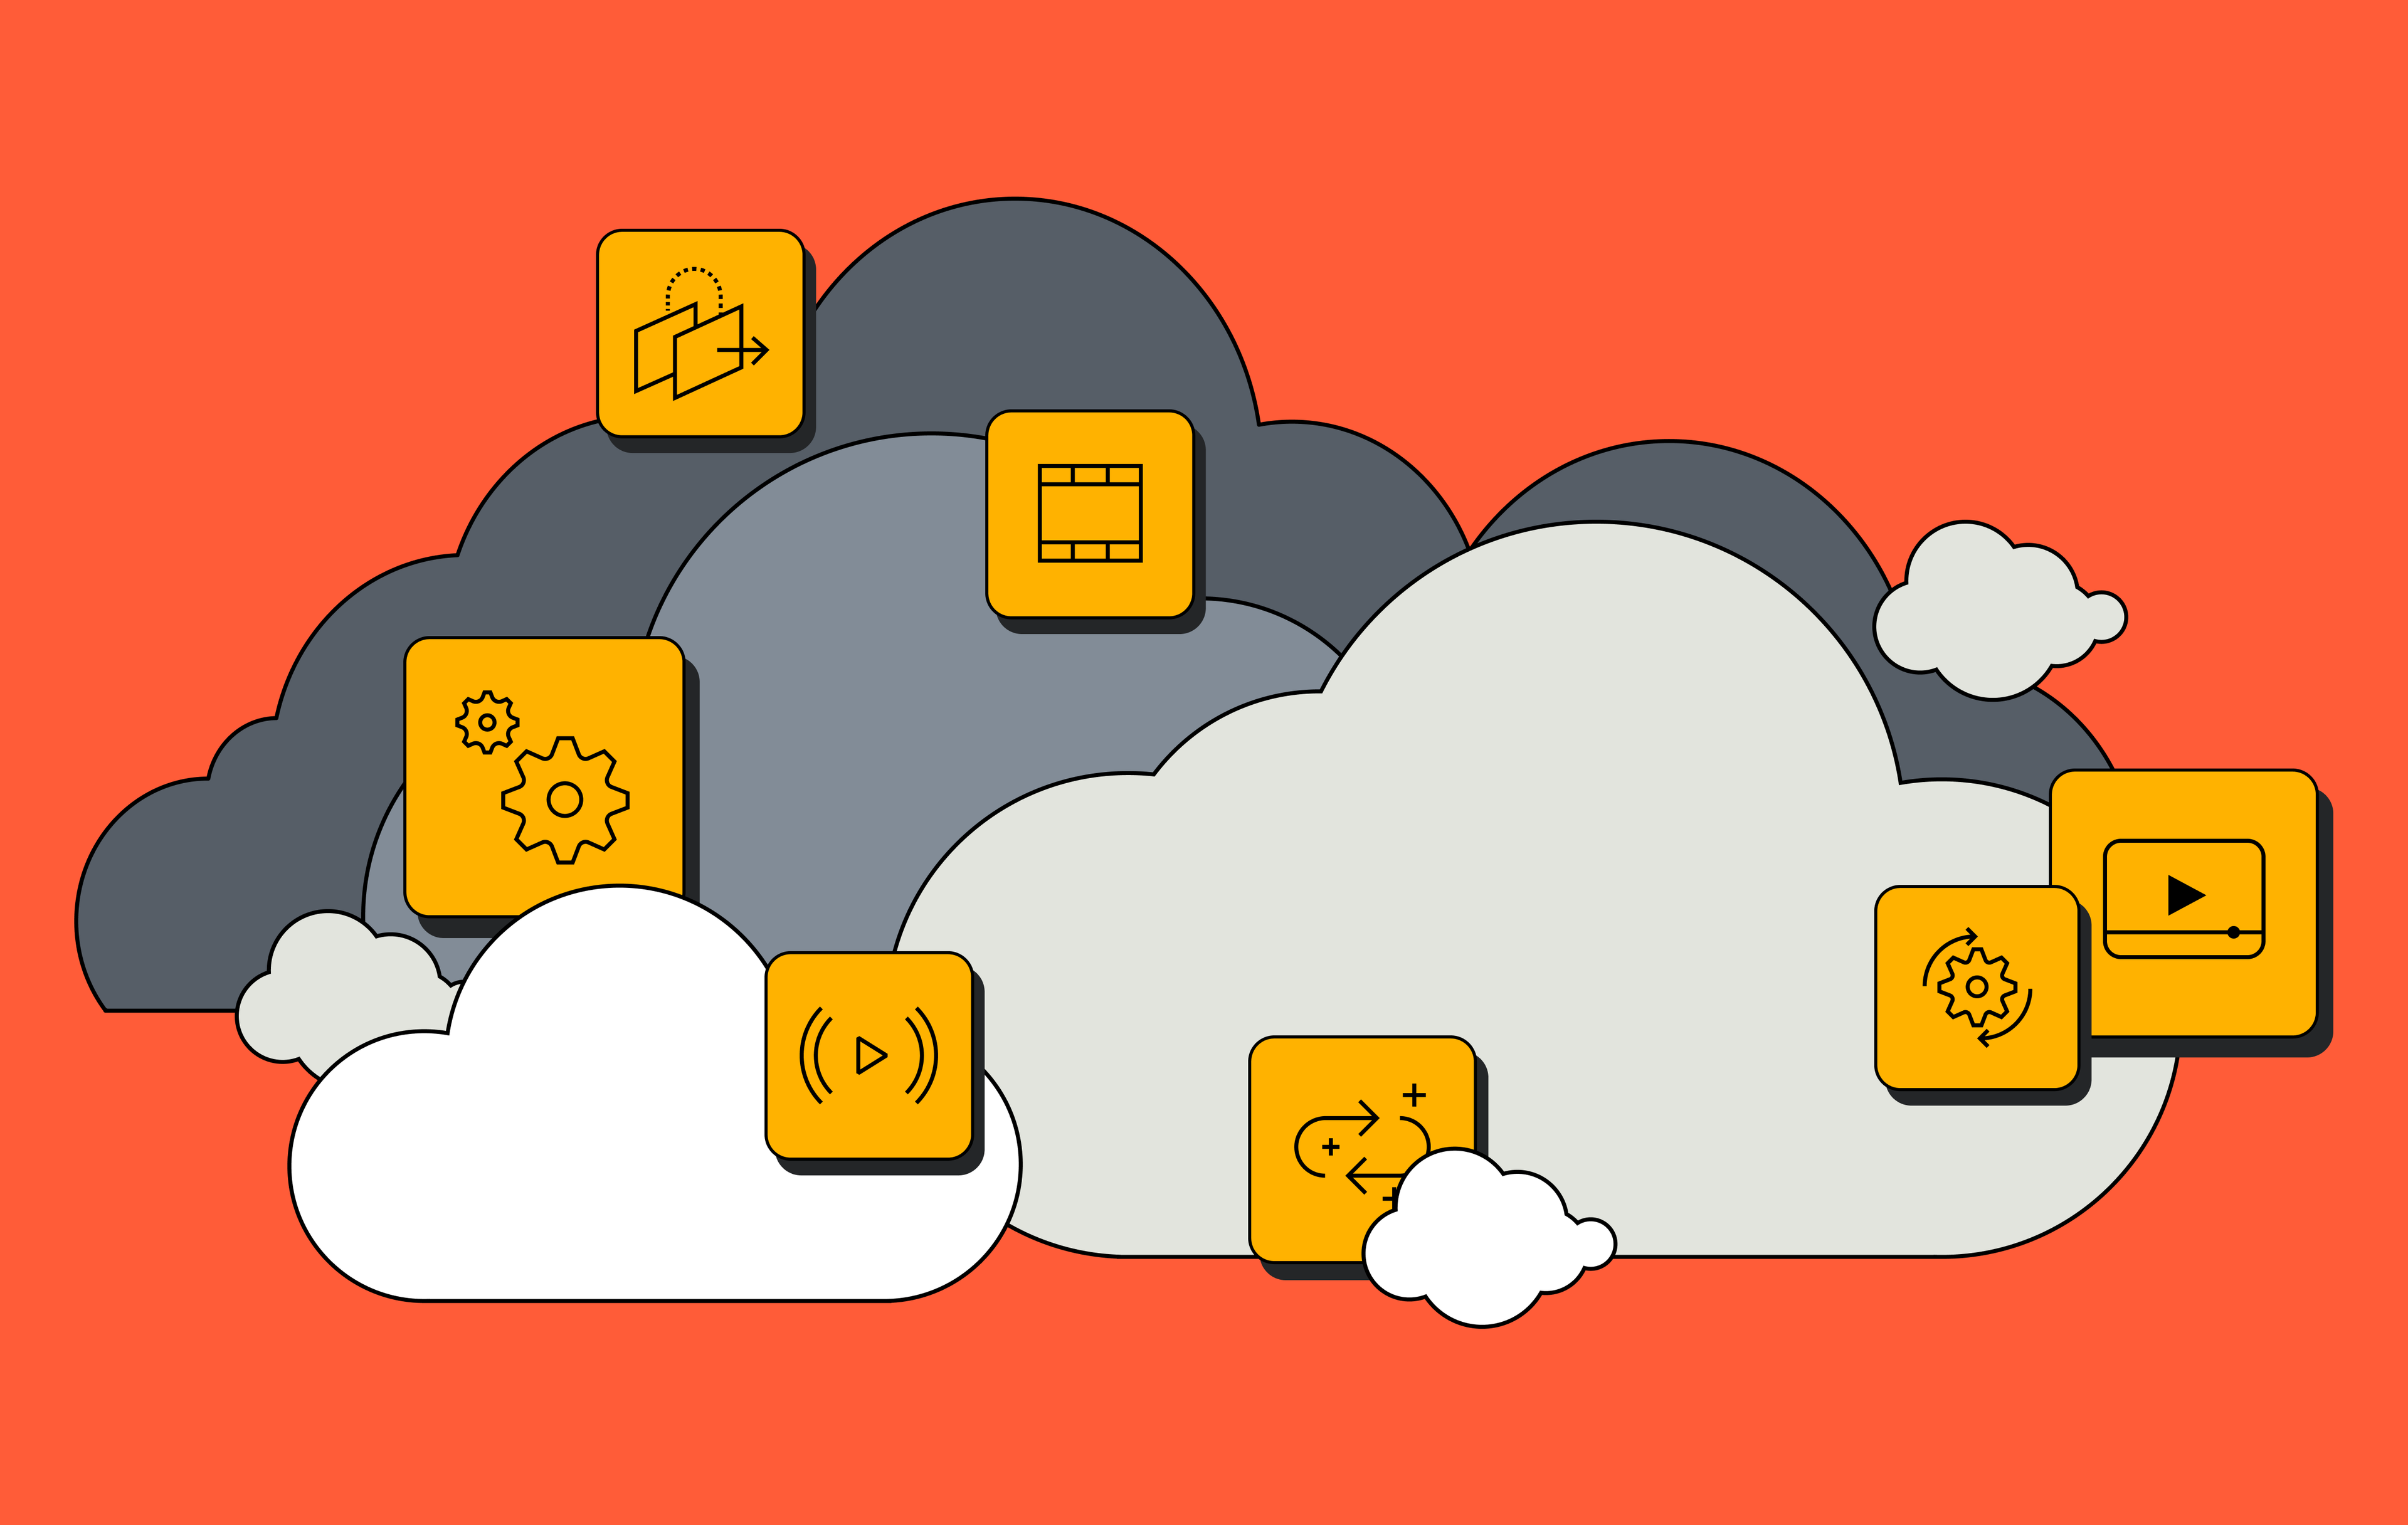 A graphic design of a group of thunderstorm clouds containing icons that depict the actions of a typical cloud encoding service.